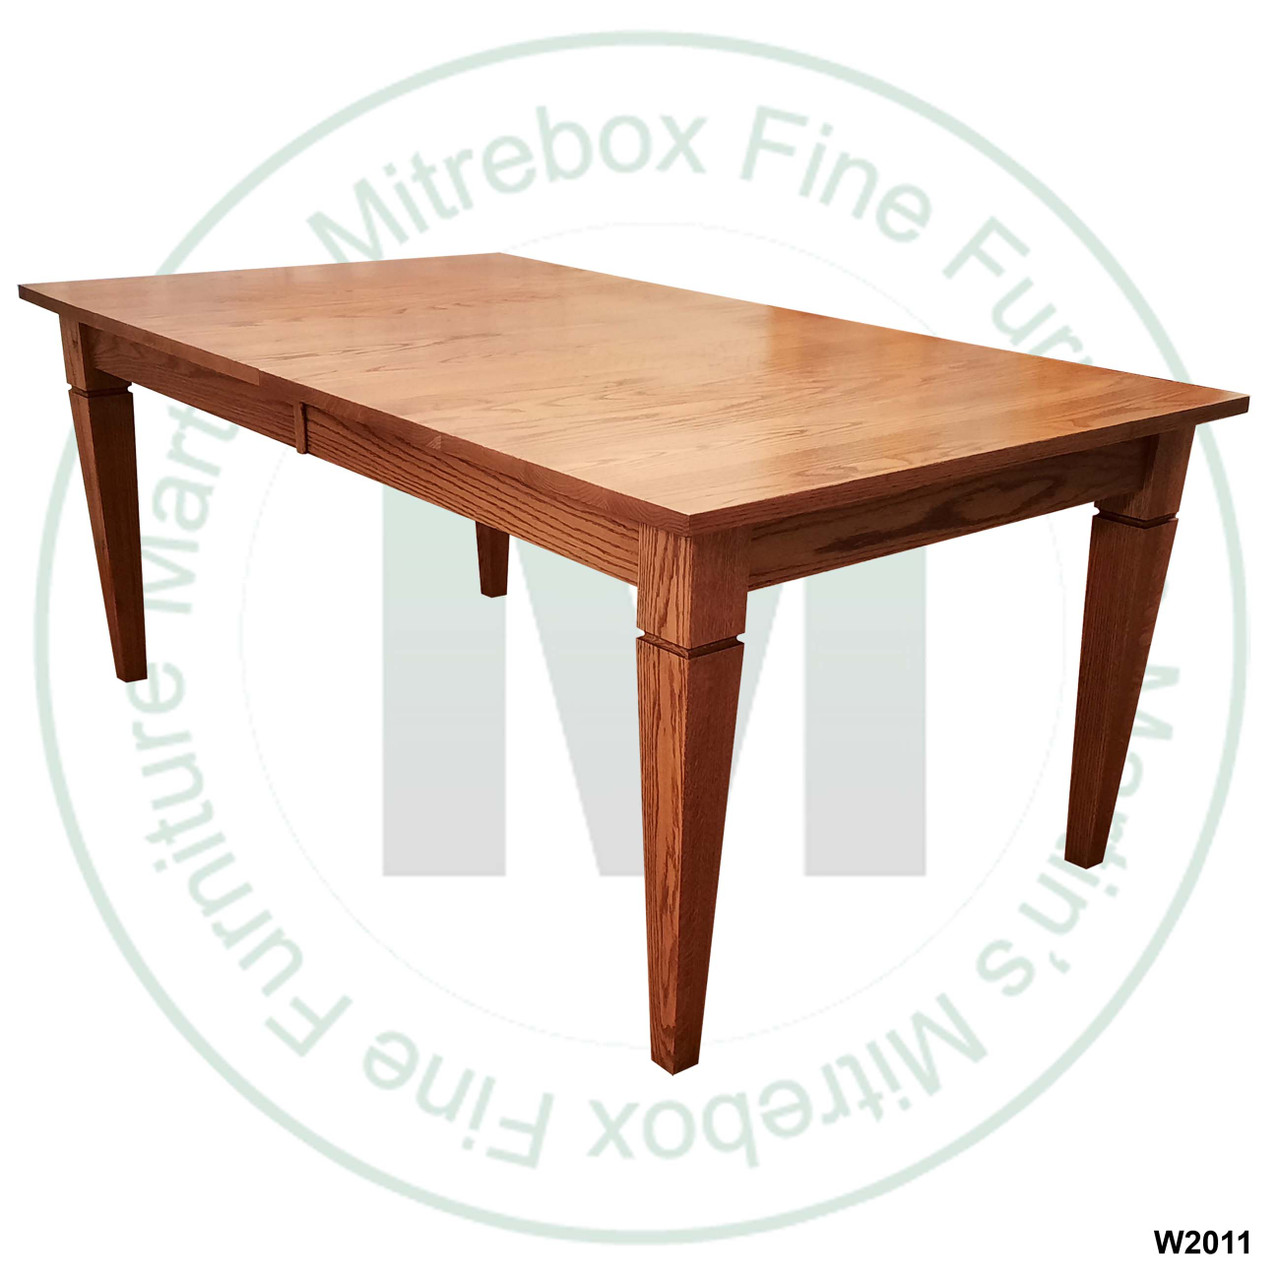 Oak Reesor Solid Top Harvest Table 36''D x 48''W x 30''H Table Has 1'' Thick Top